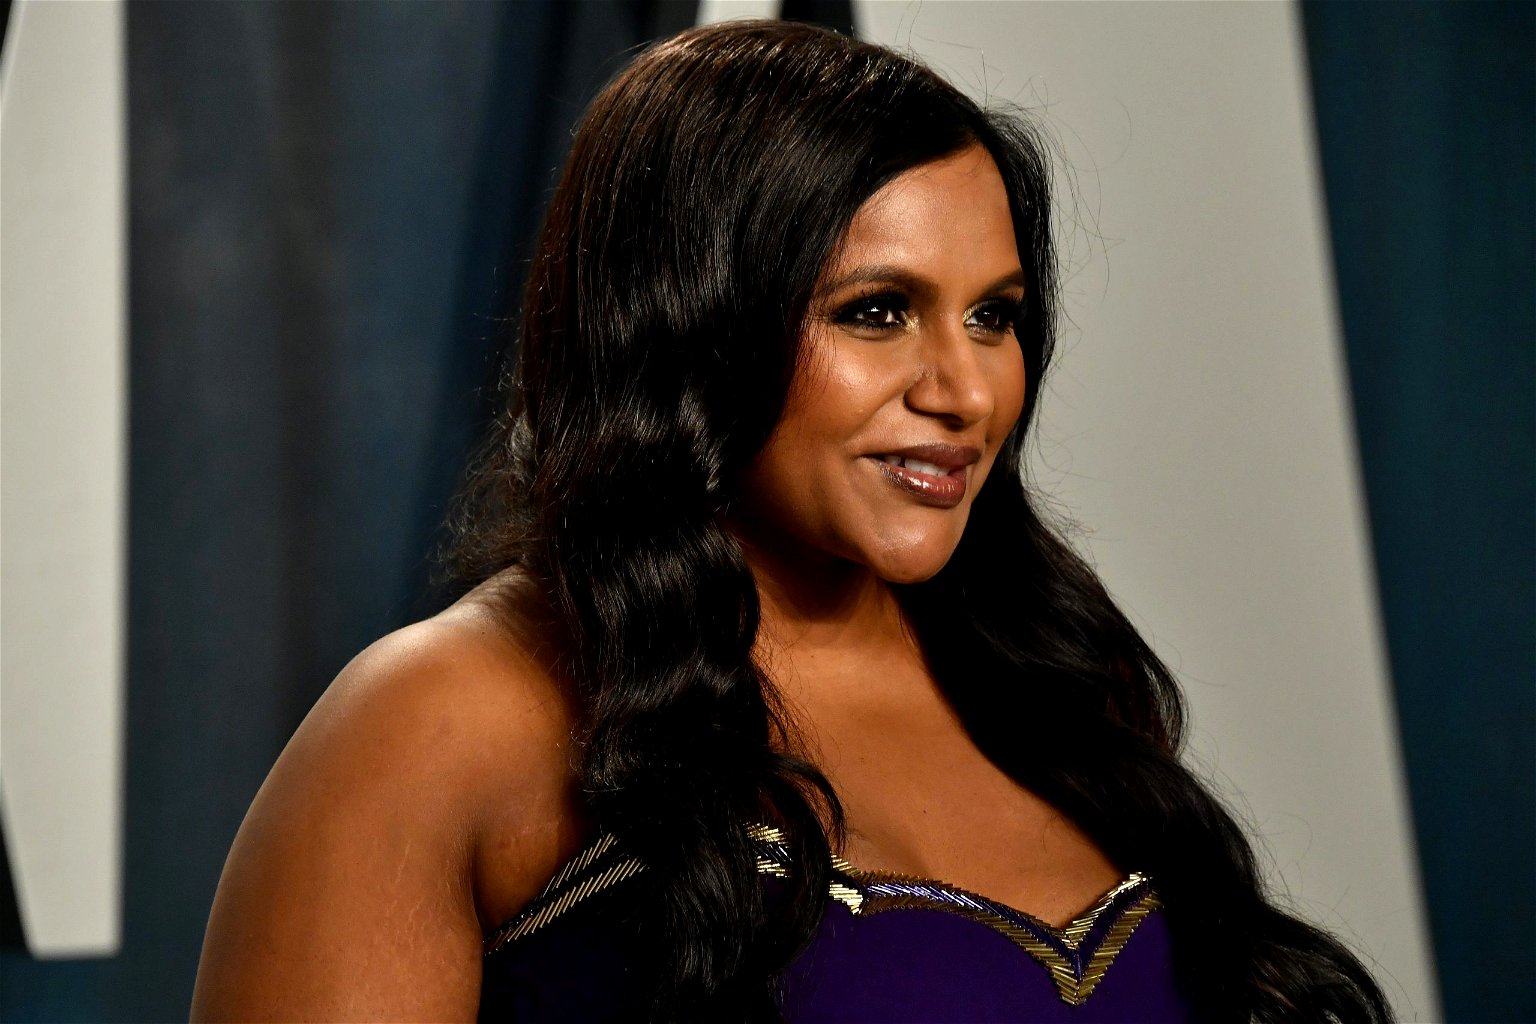 Mindy Kaling is Getting a Netflix Show Based on Her Experiences as an Indian American Teen